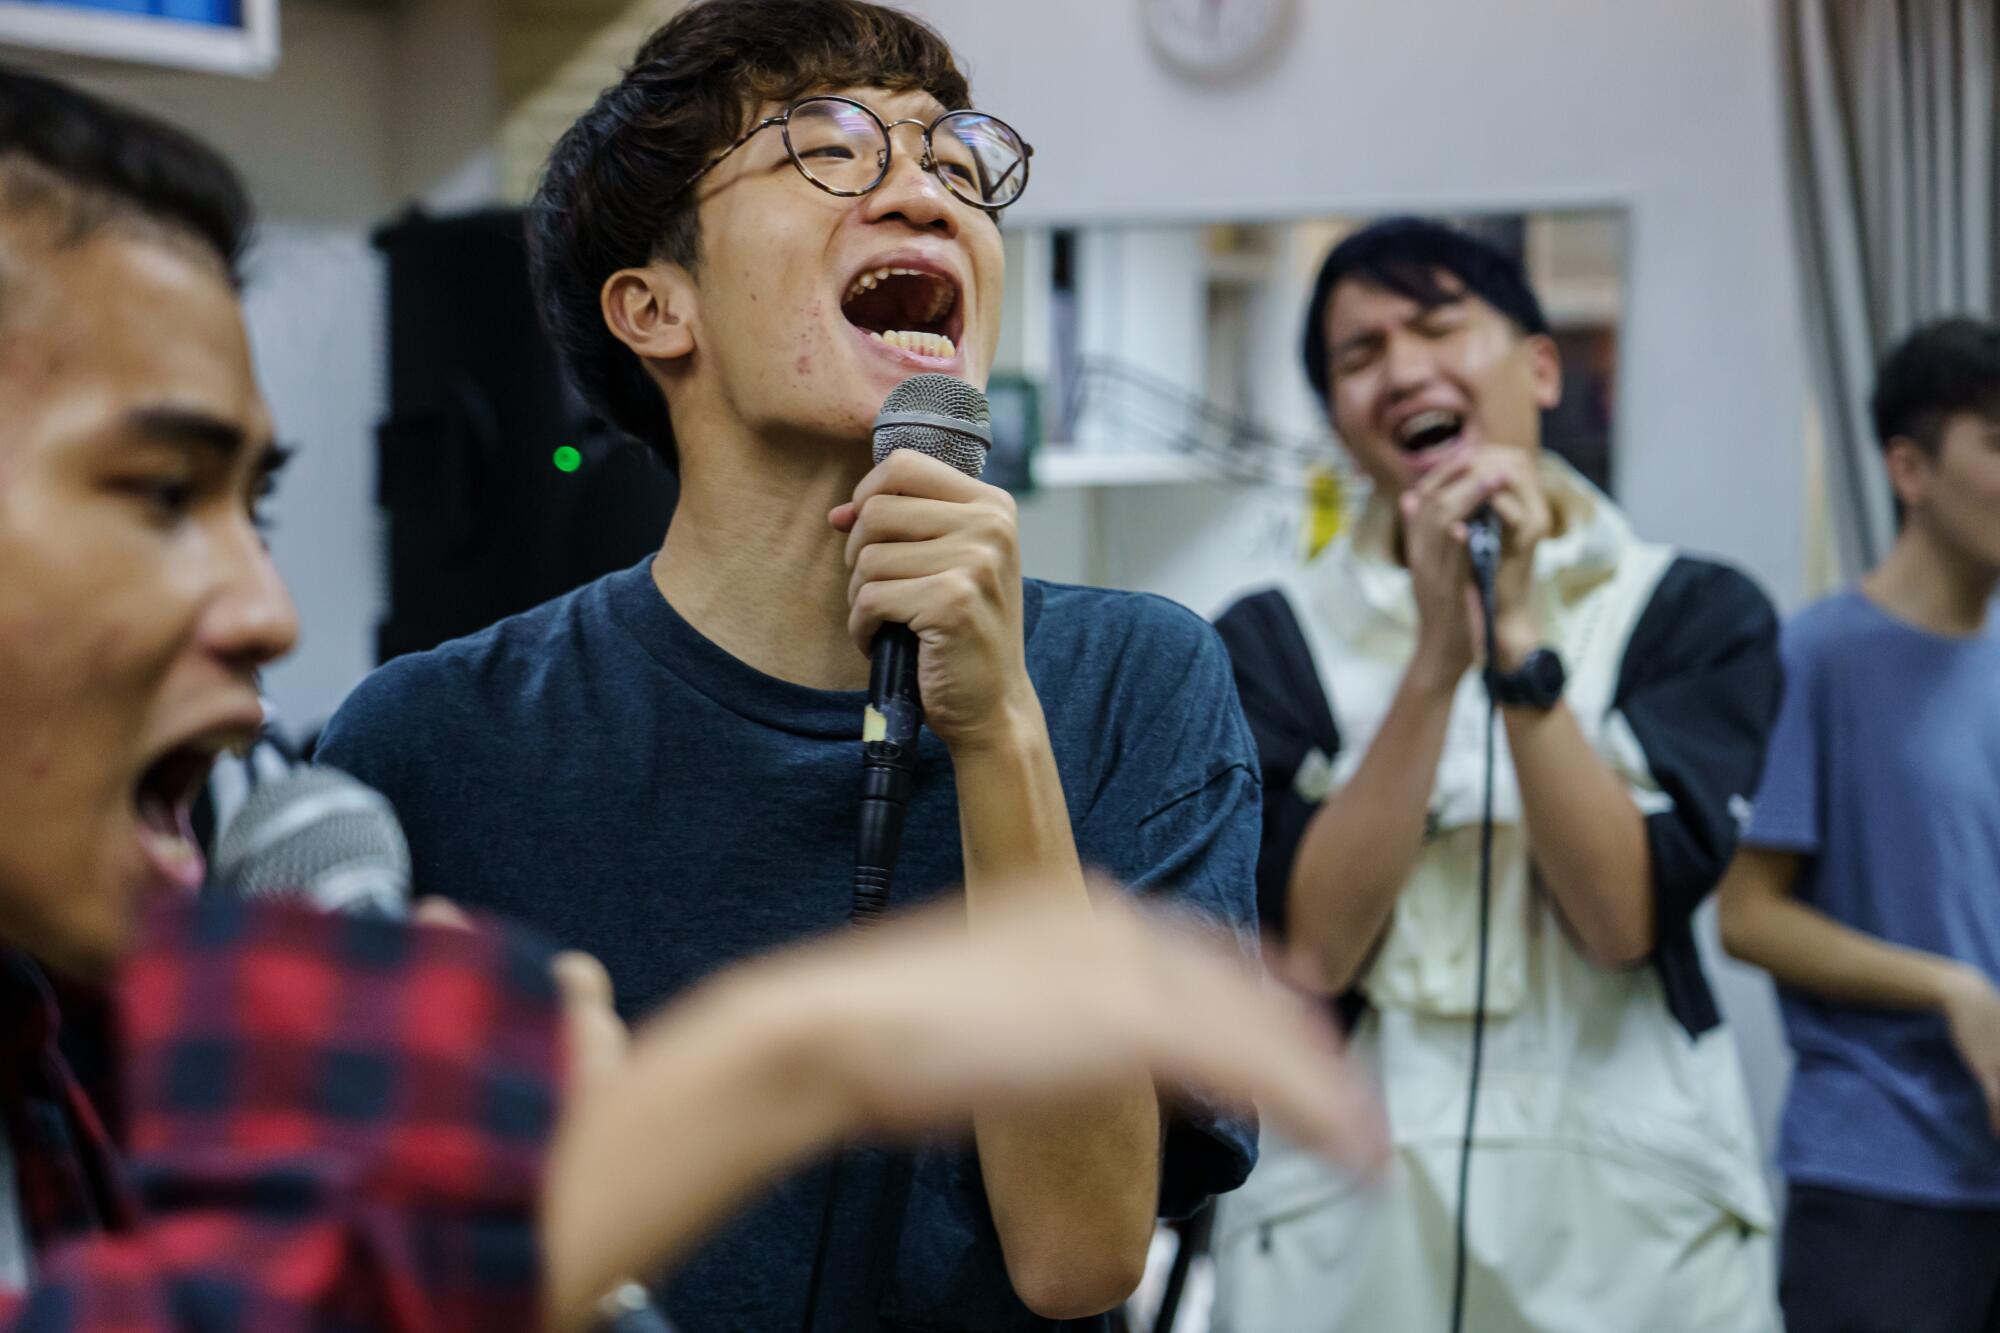 Ben Chan sings with the rest of his crew during Boyz Reborn's regular rehearsal in Hong Kong.